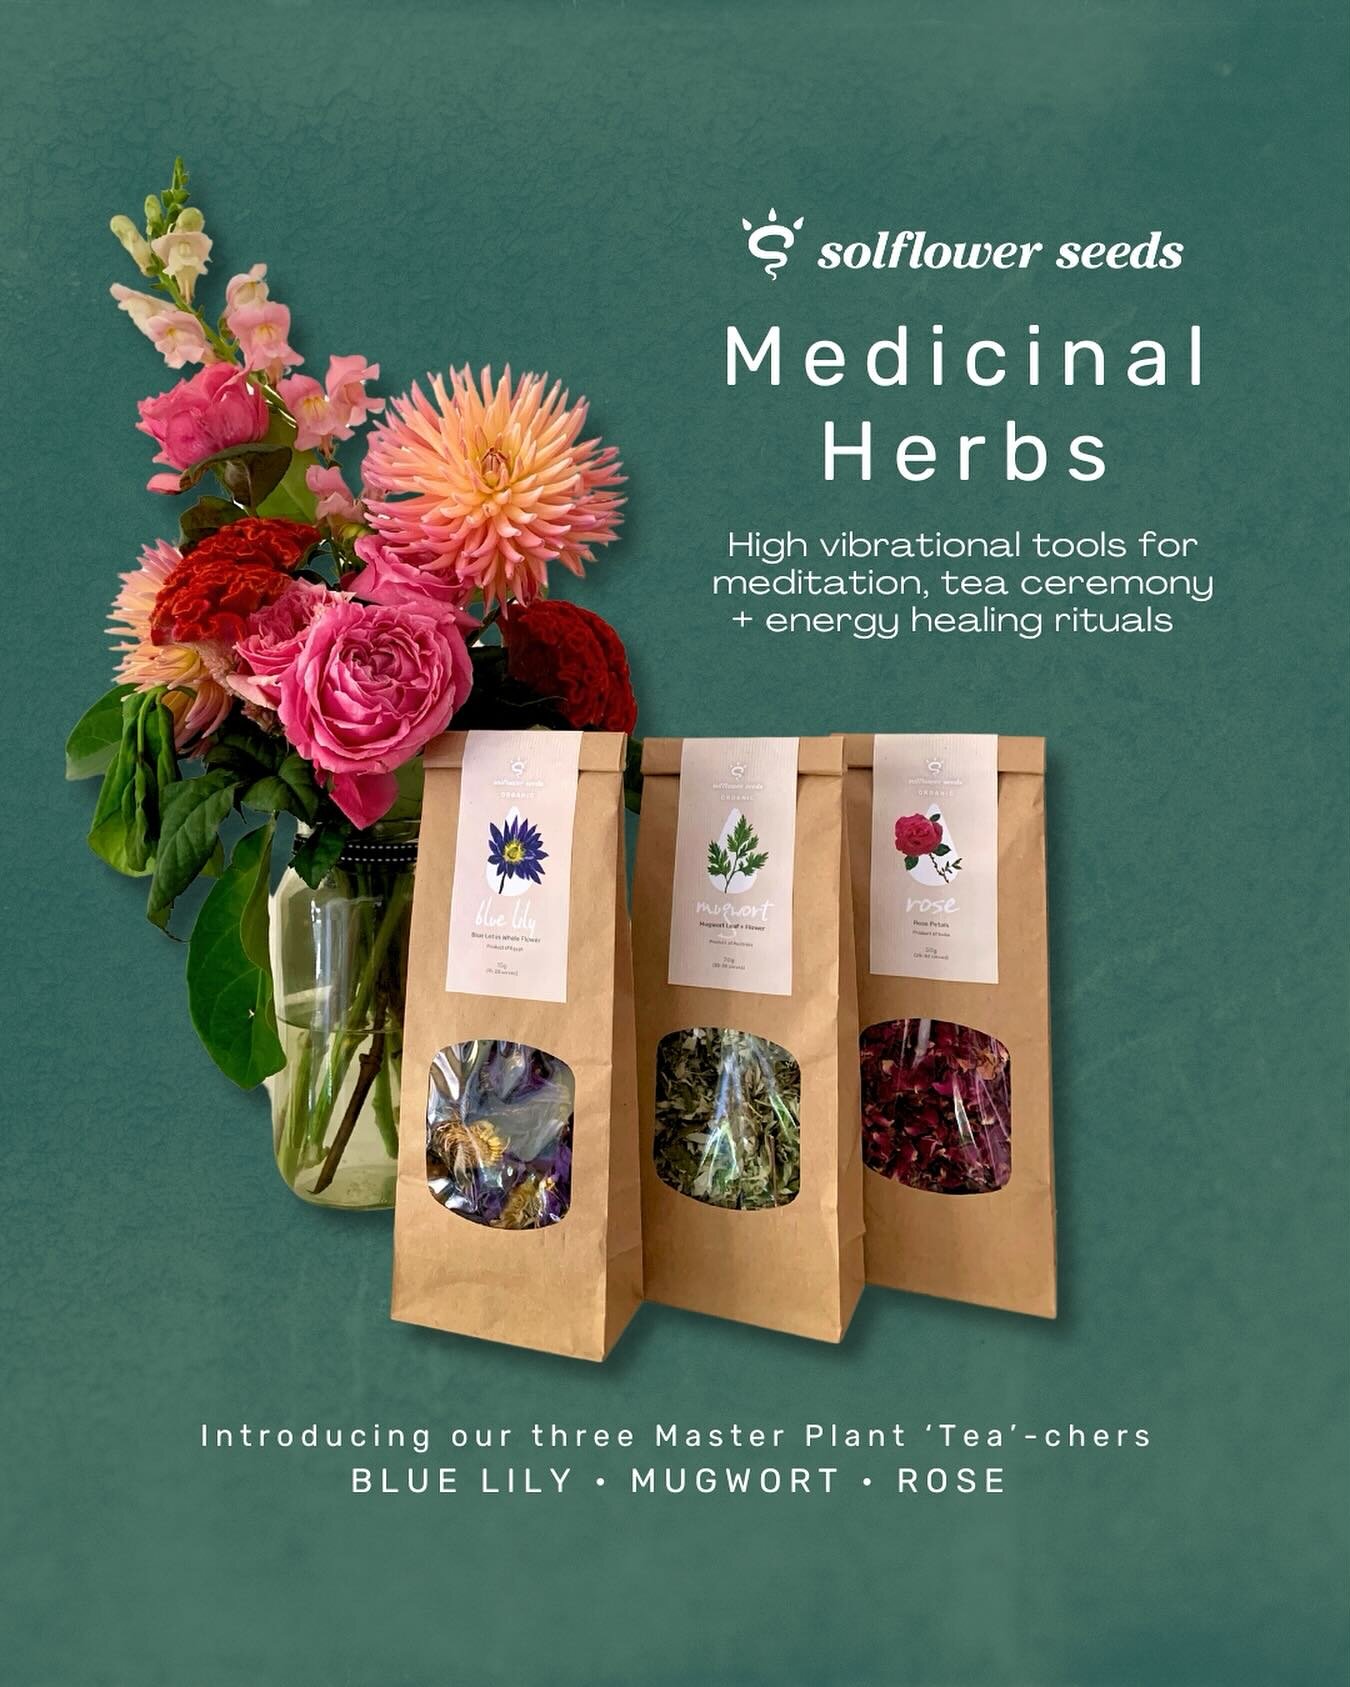 Exciting news 🥳 My organic herbs range is finally here!

Introducing the Three Master Plant Tea-chers I serve in my Tea Ceremonies

Get it? &lsquo;Tea&rsquo; 🍵 Tea-chers 😉

You will also find these powerful plant allies infused into the cacao brew